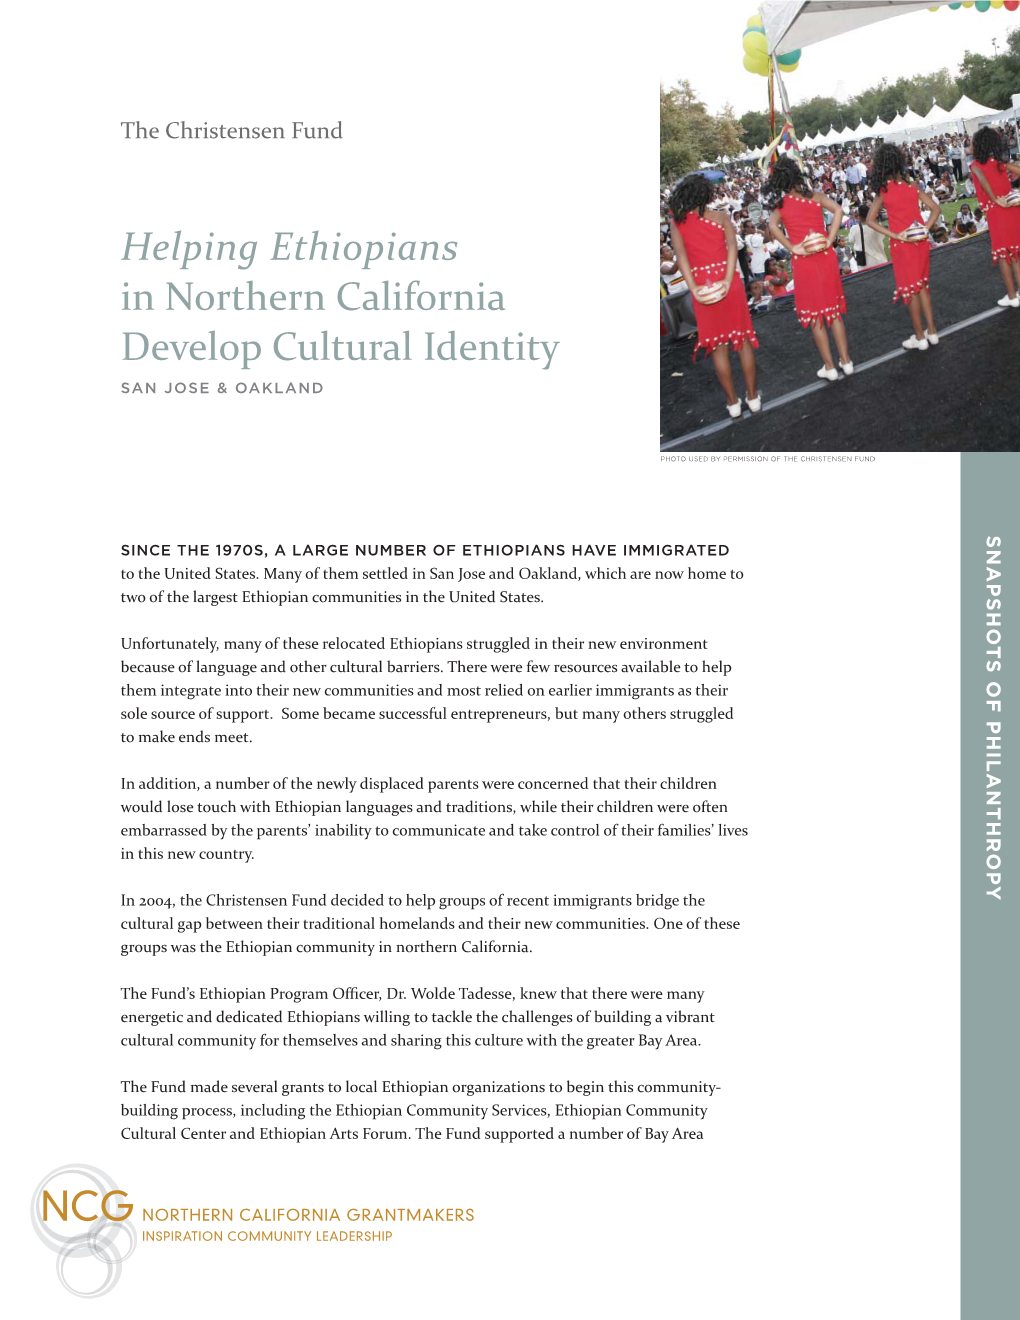 Helping Ethiopians in Northern California Develop Cultural Identity